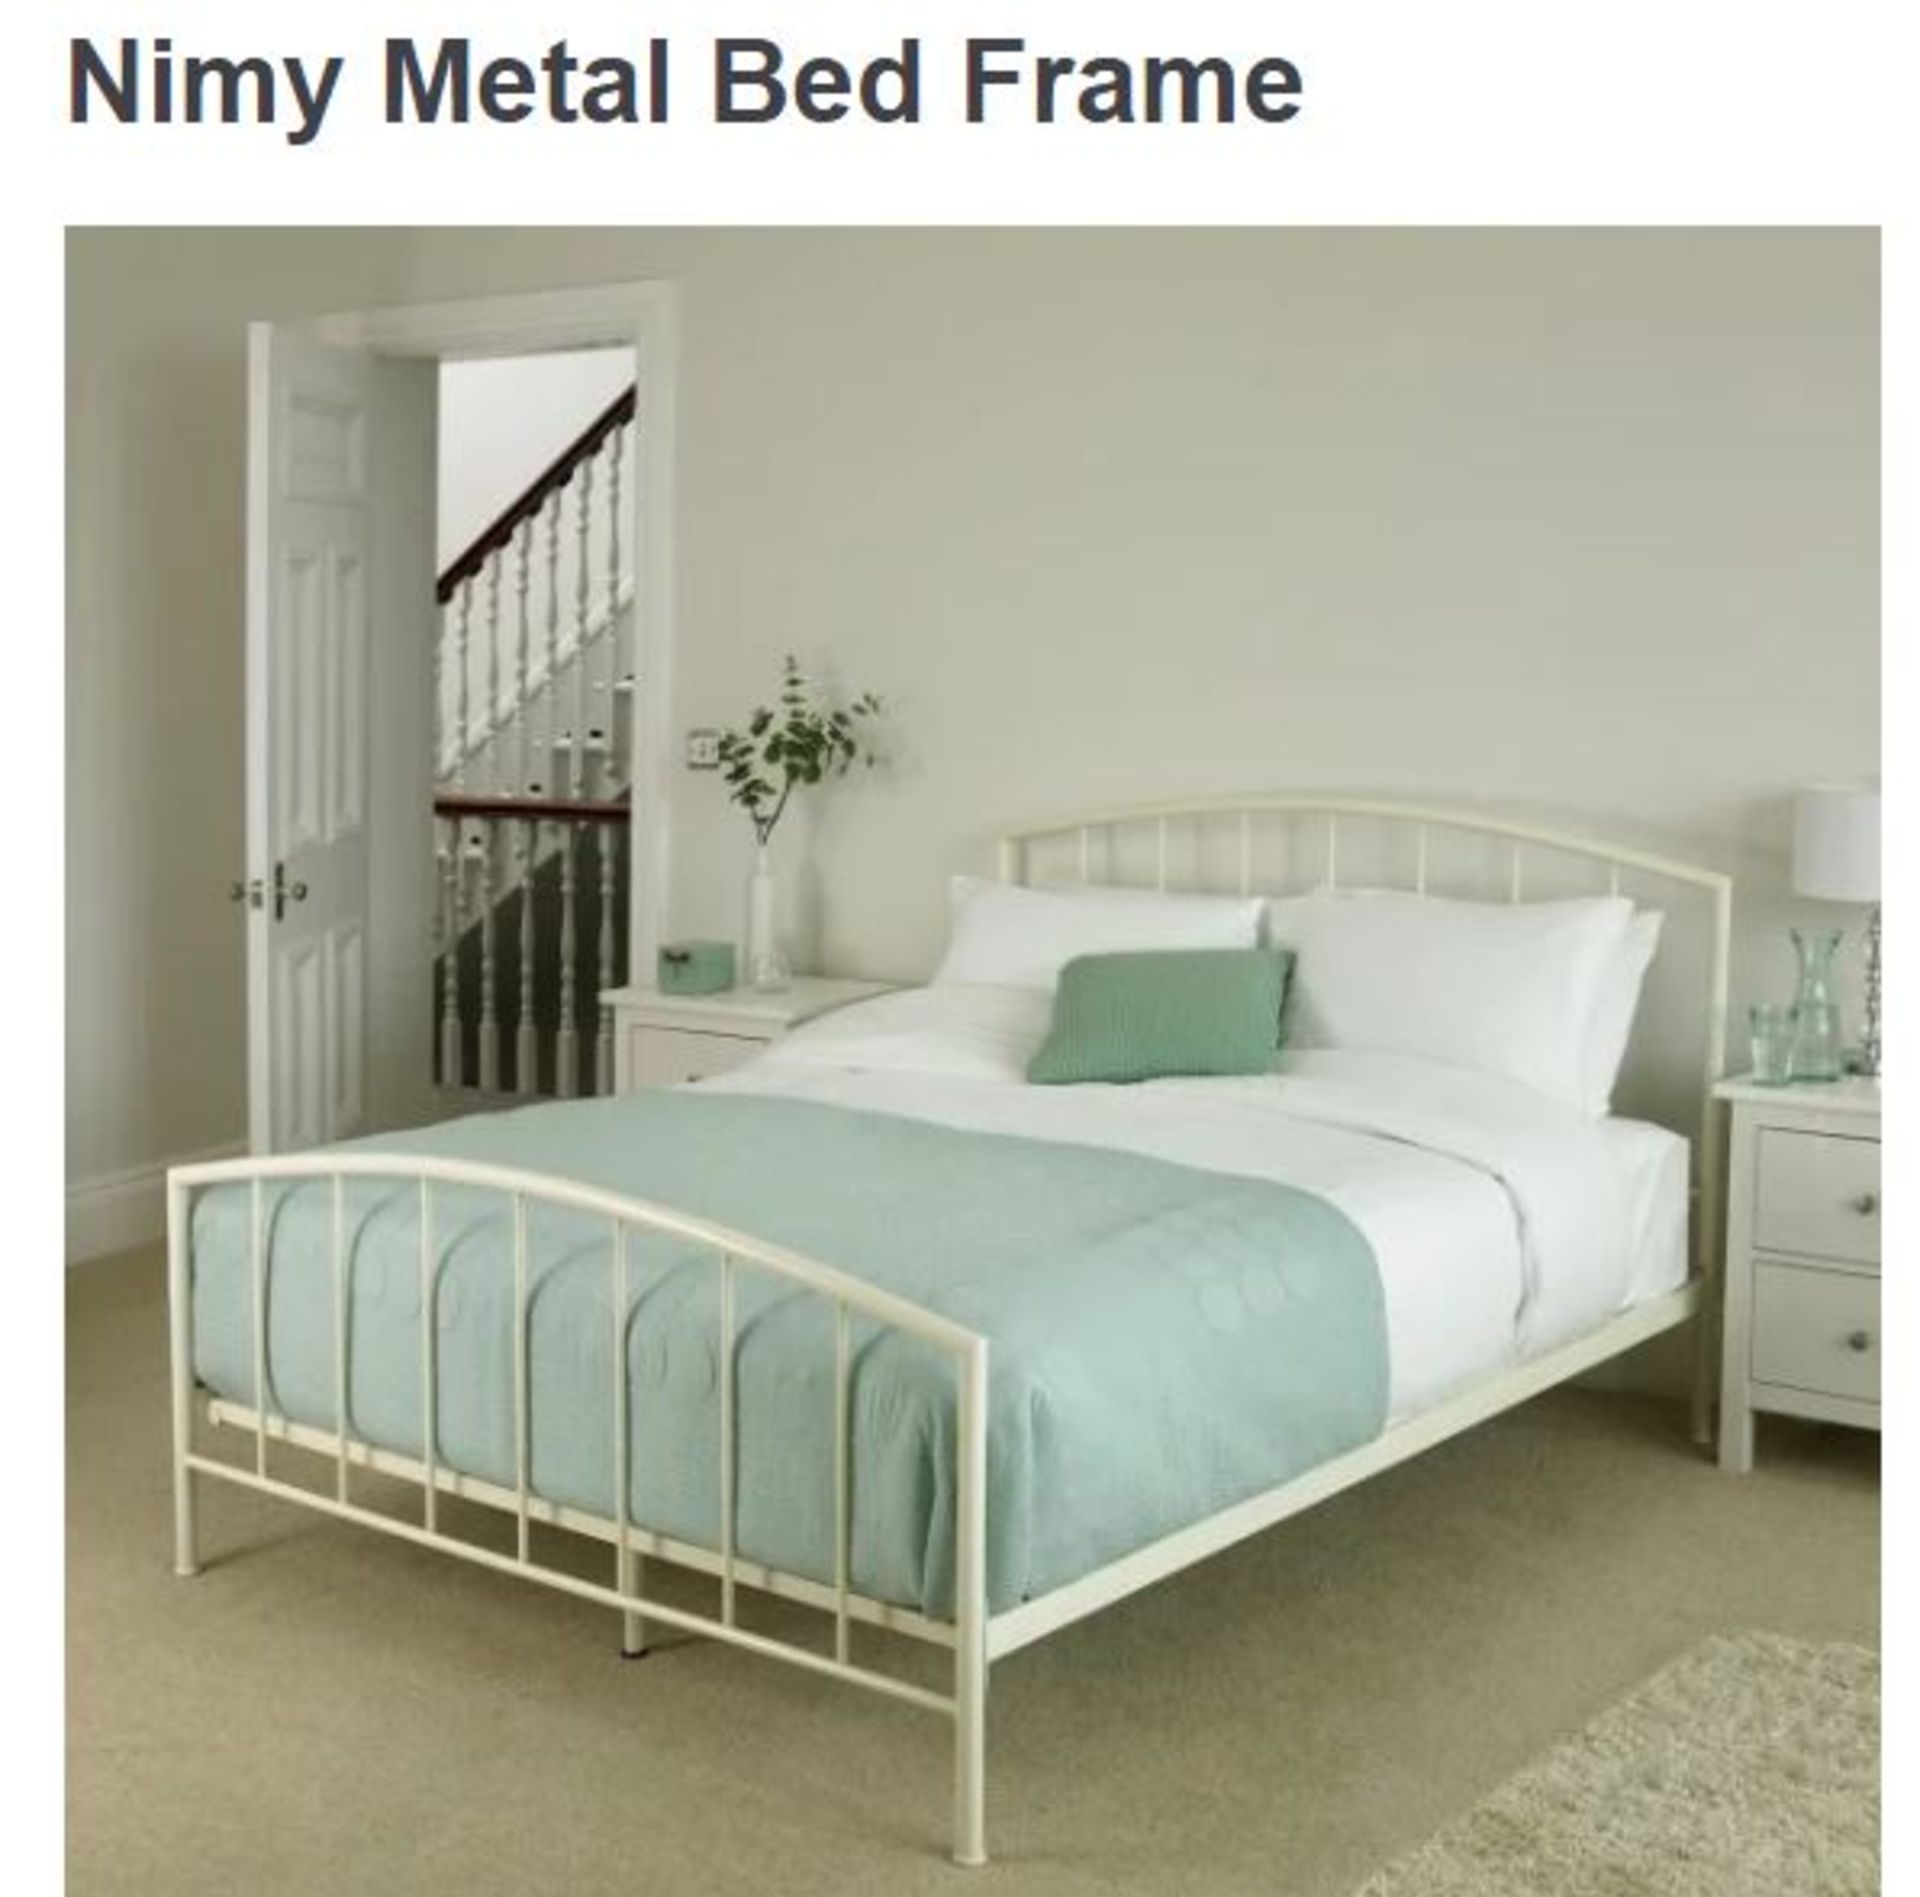 New & Sealed Packaging – Nimy Metal Bed Frame - Items 5 - RRP £395.00